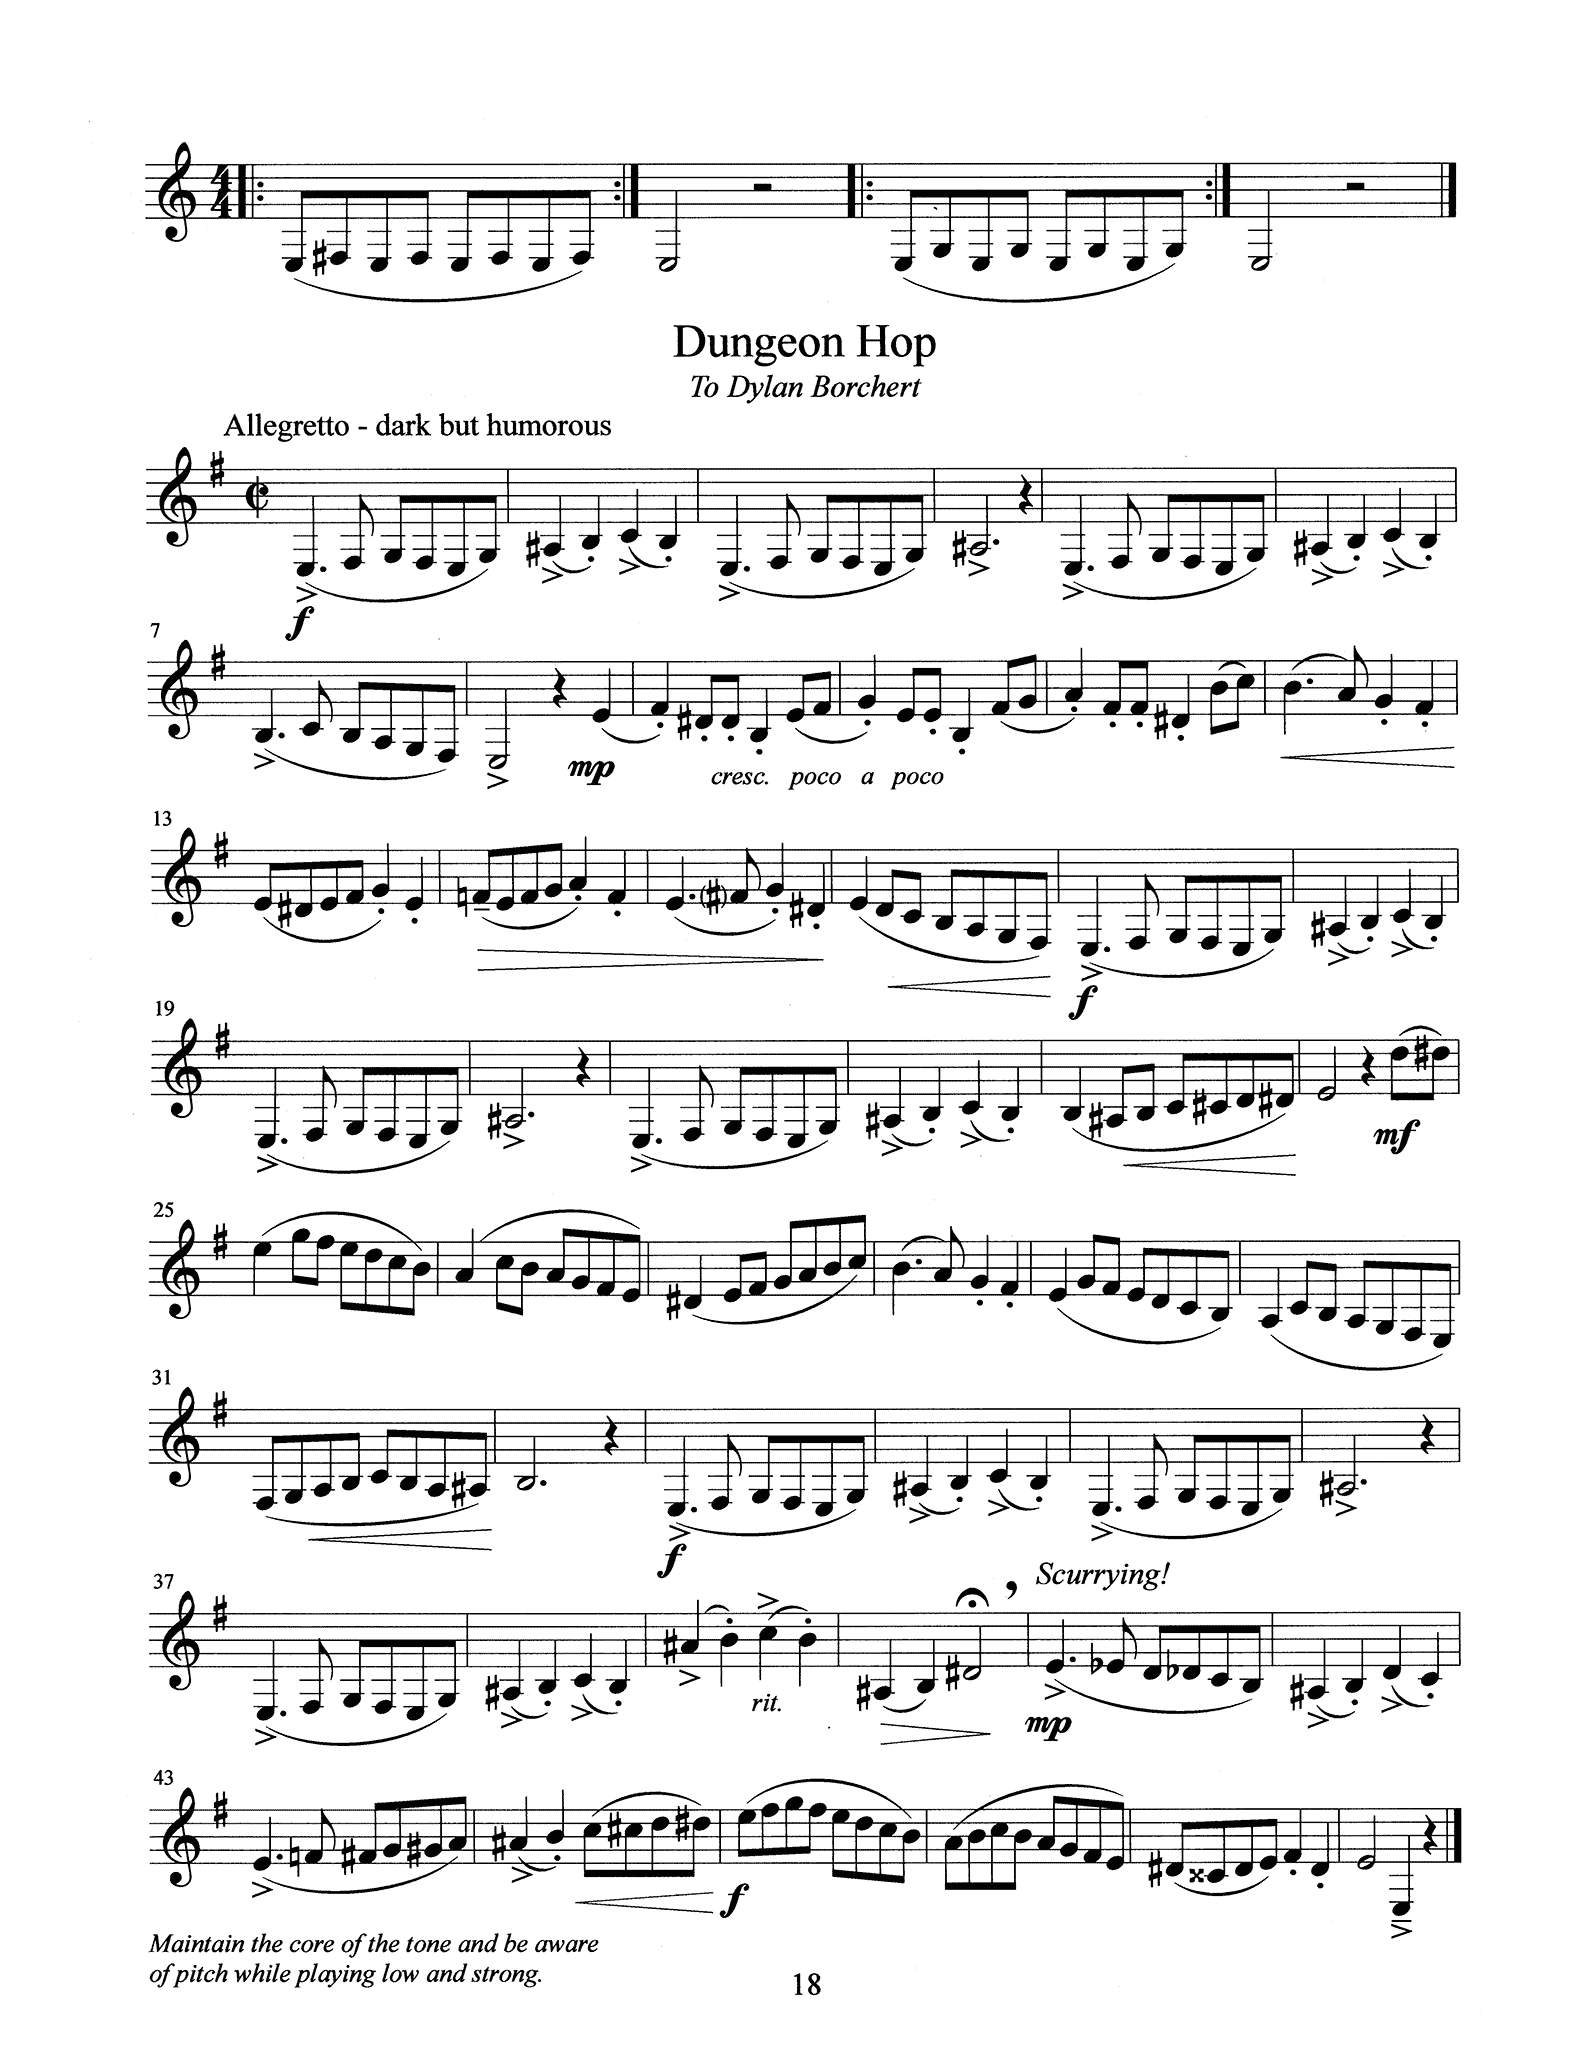 Denny-Chambers Finger Fitness Clarinet Études Page 18